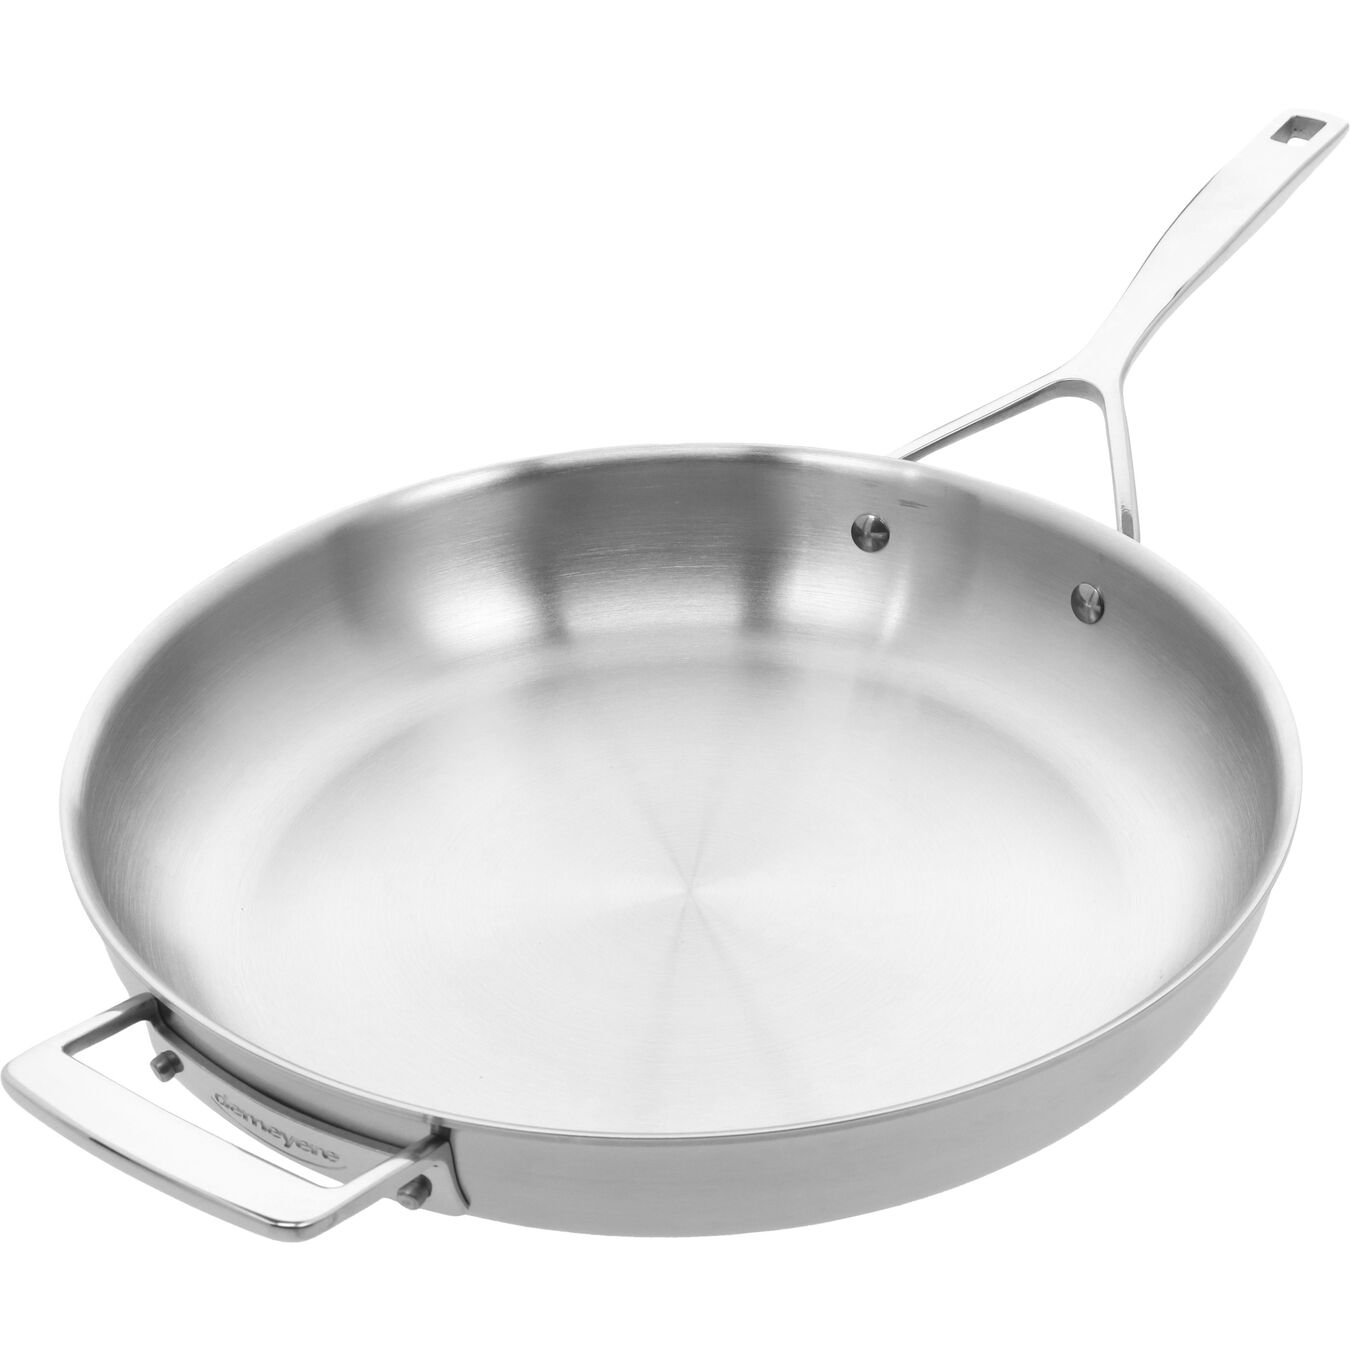 32 cm / 12.5 inch 18/10 Stainless Steel frying pan with lid,,large 7